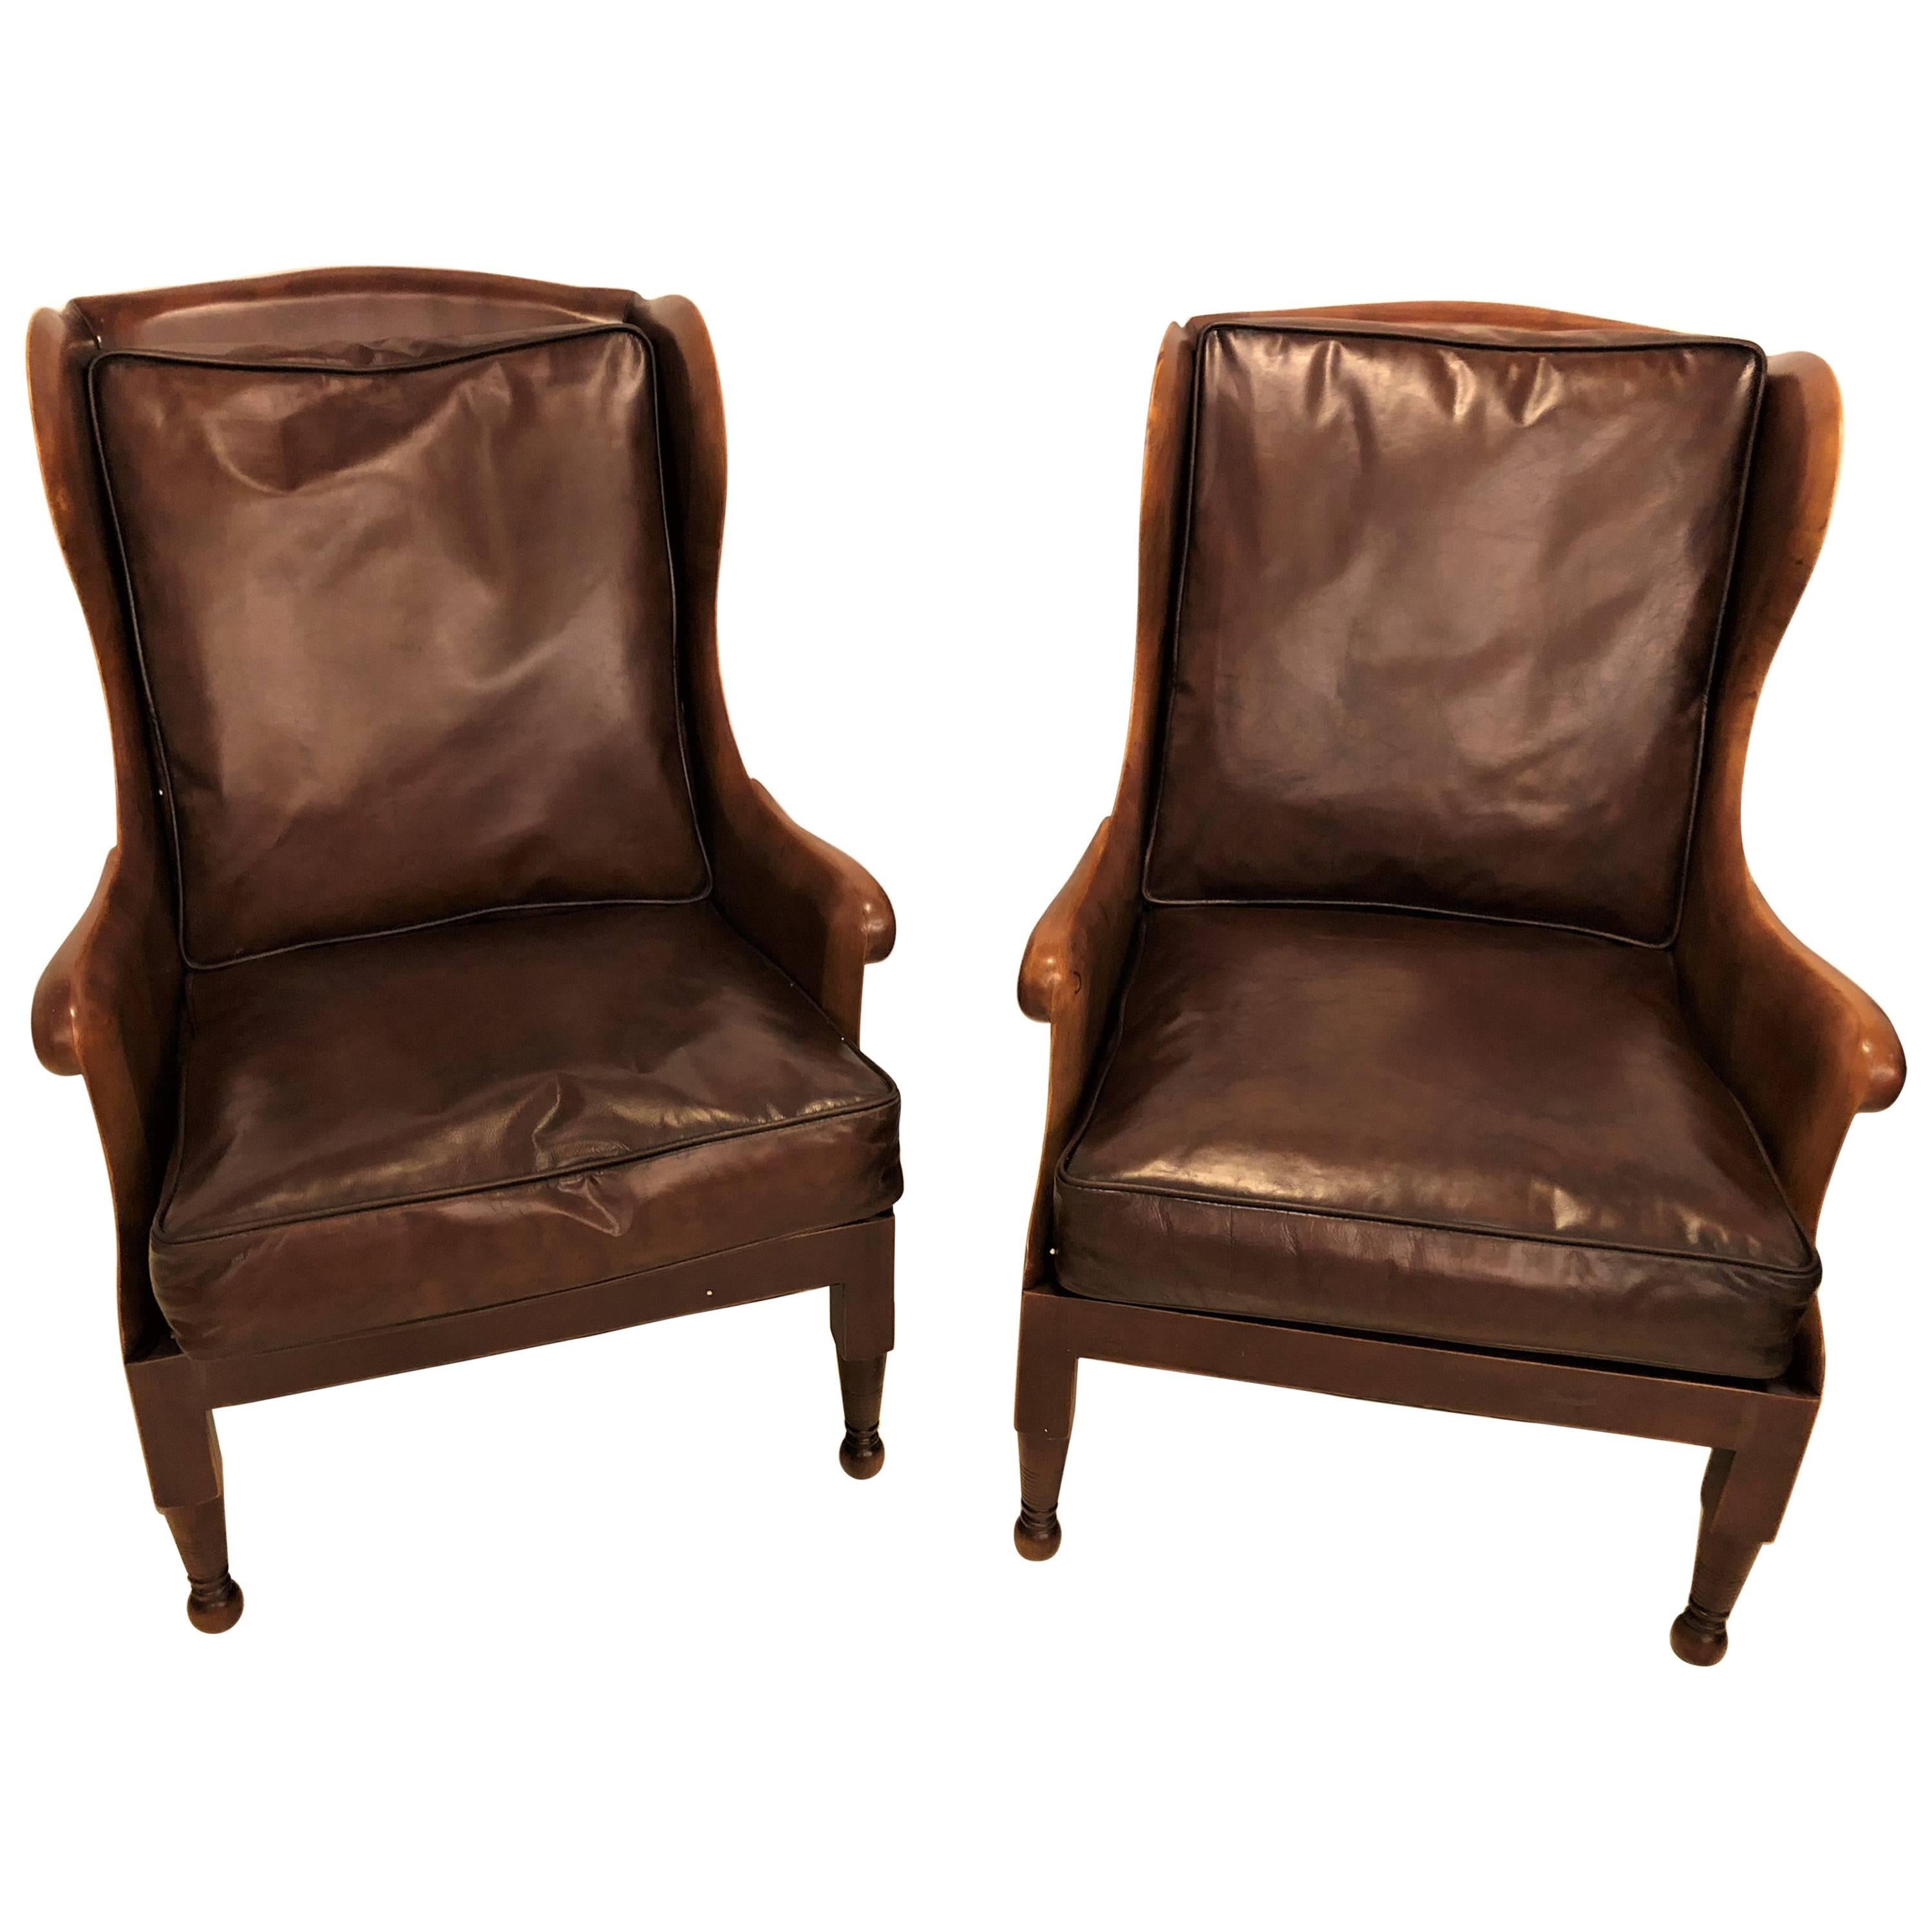 Pair of Fine Leather Lounge or Bergere Wingback Chairs